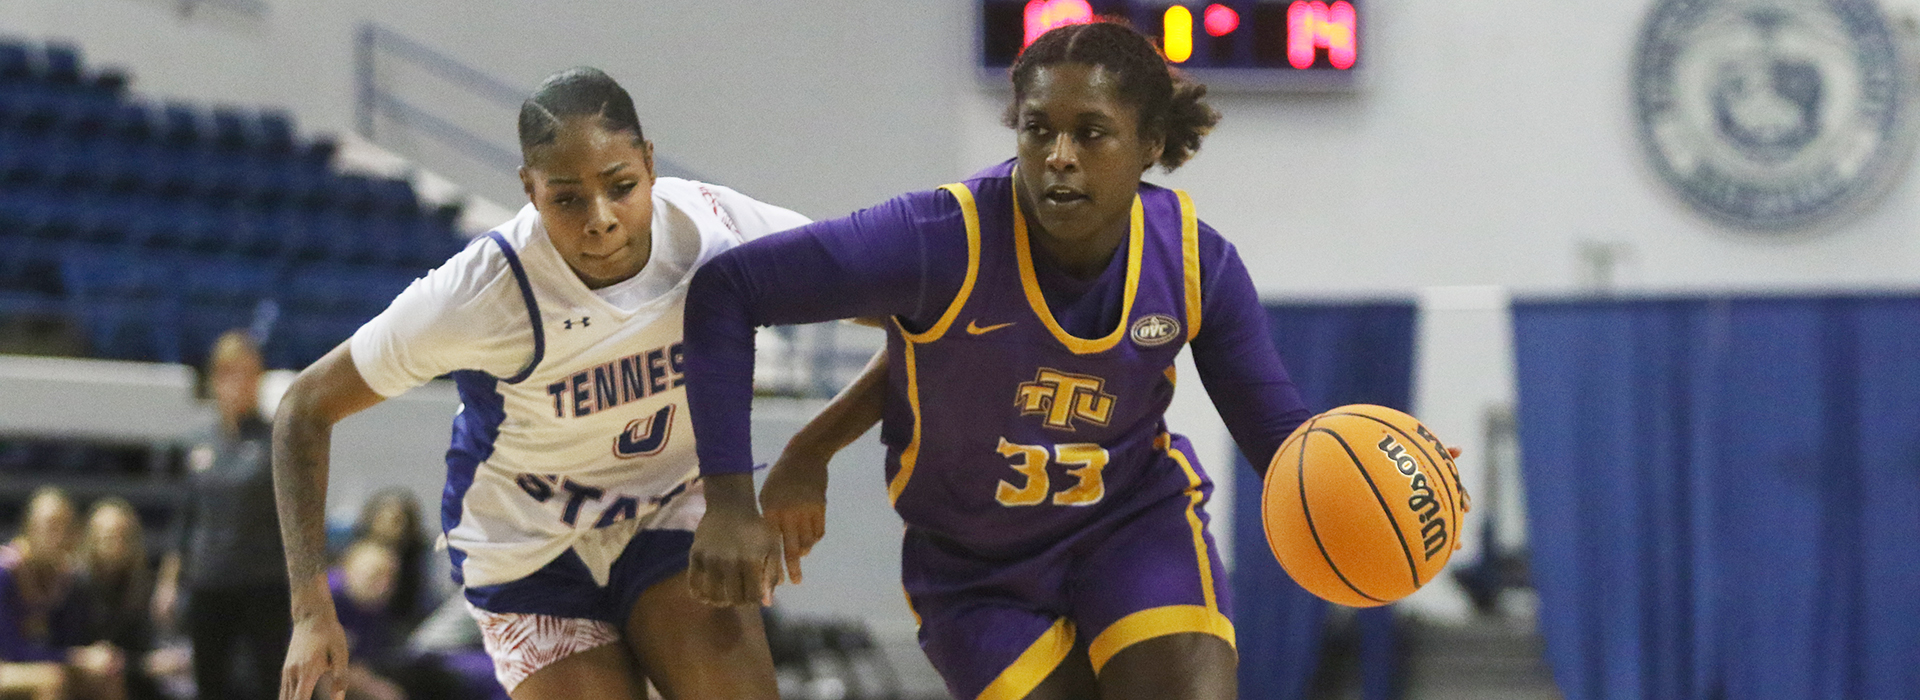 Grimes blasts away to lead Tech to win at TSU